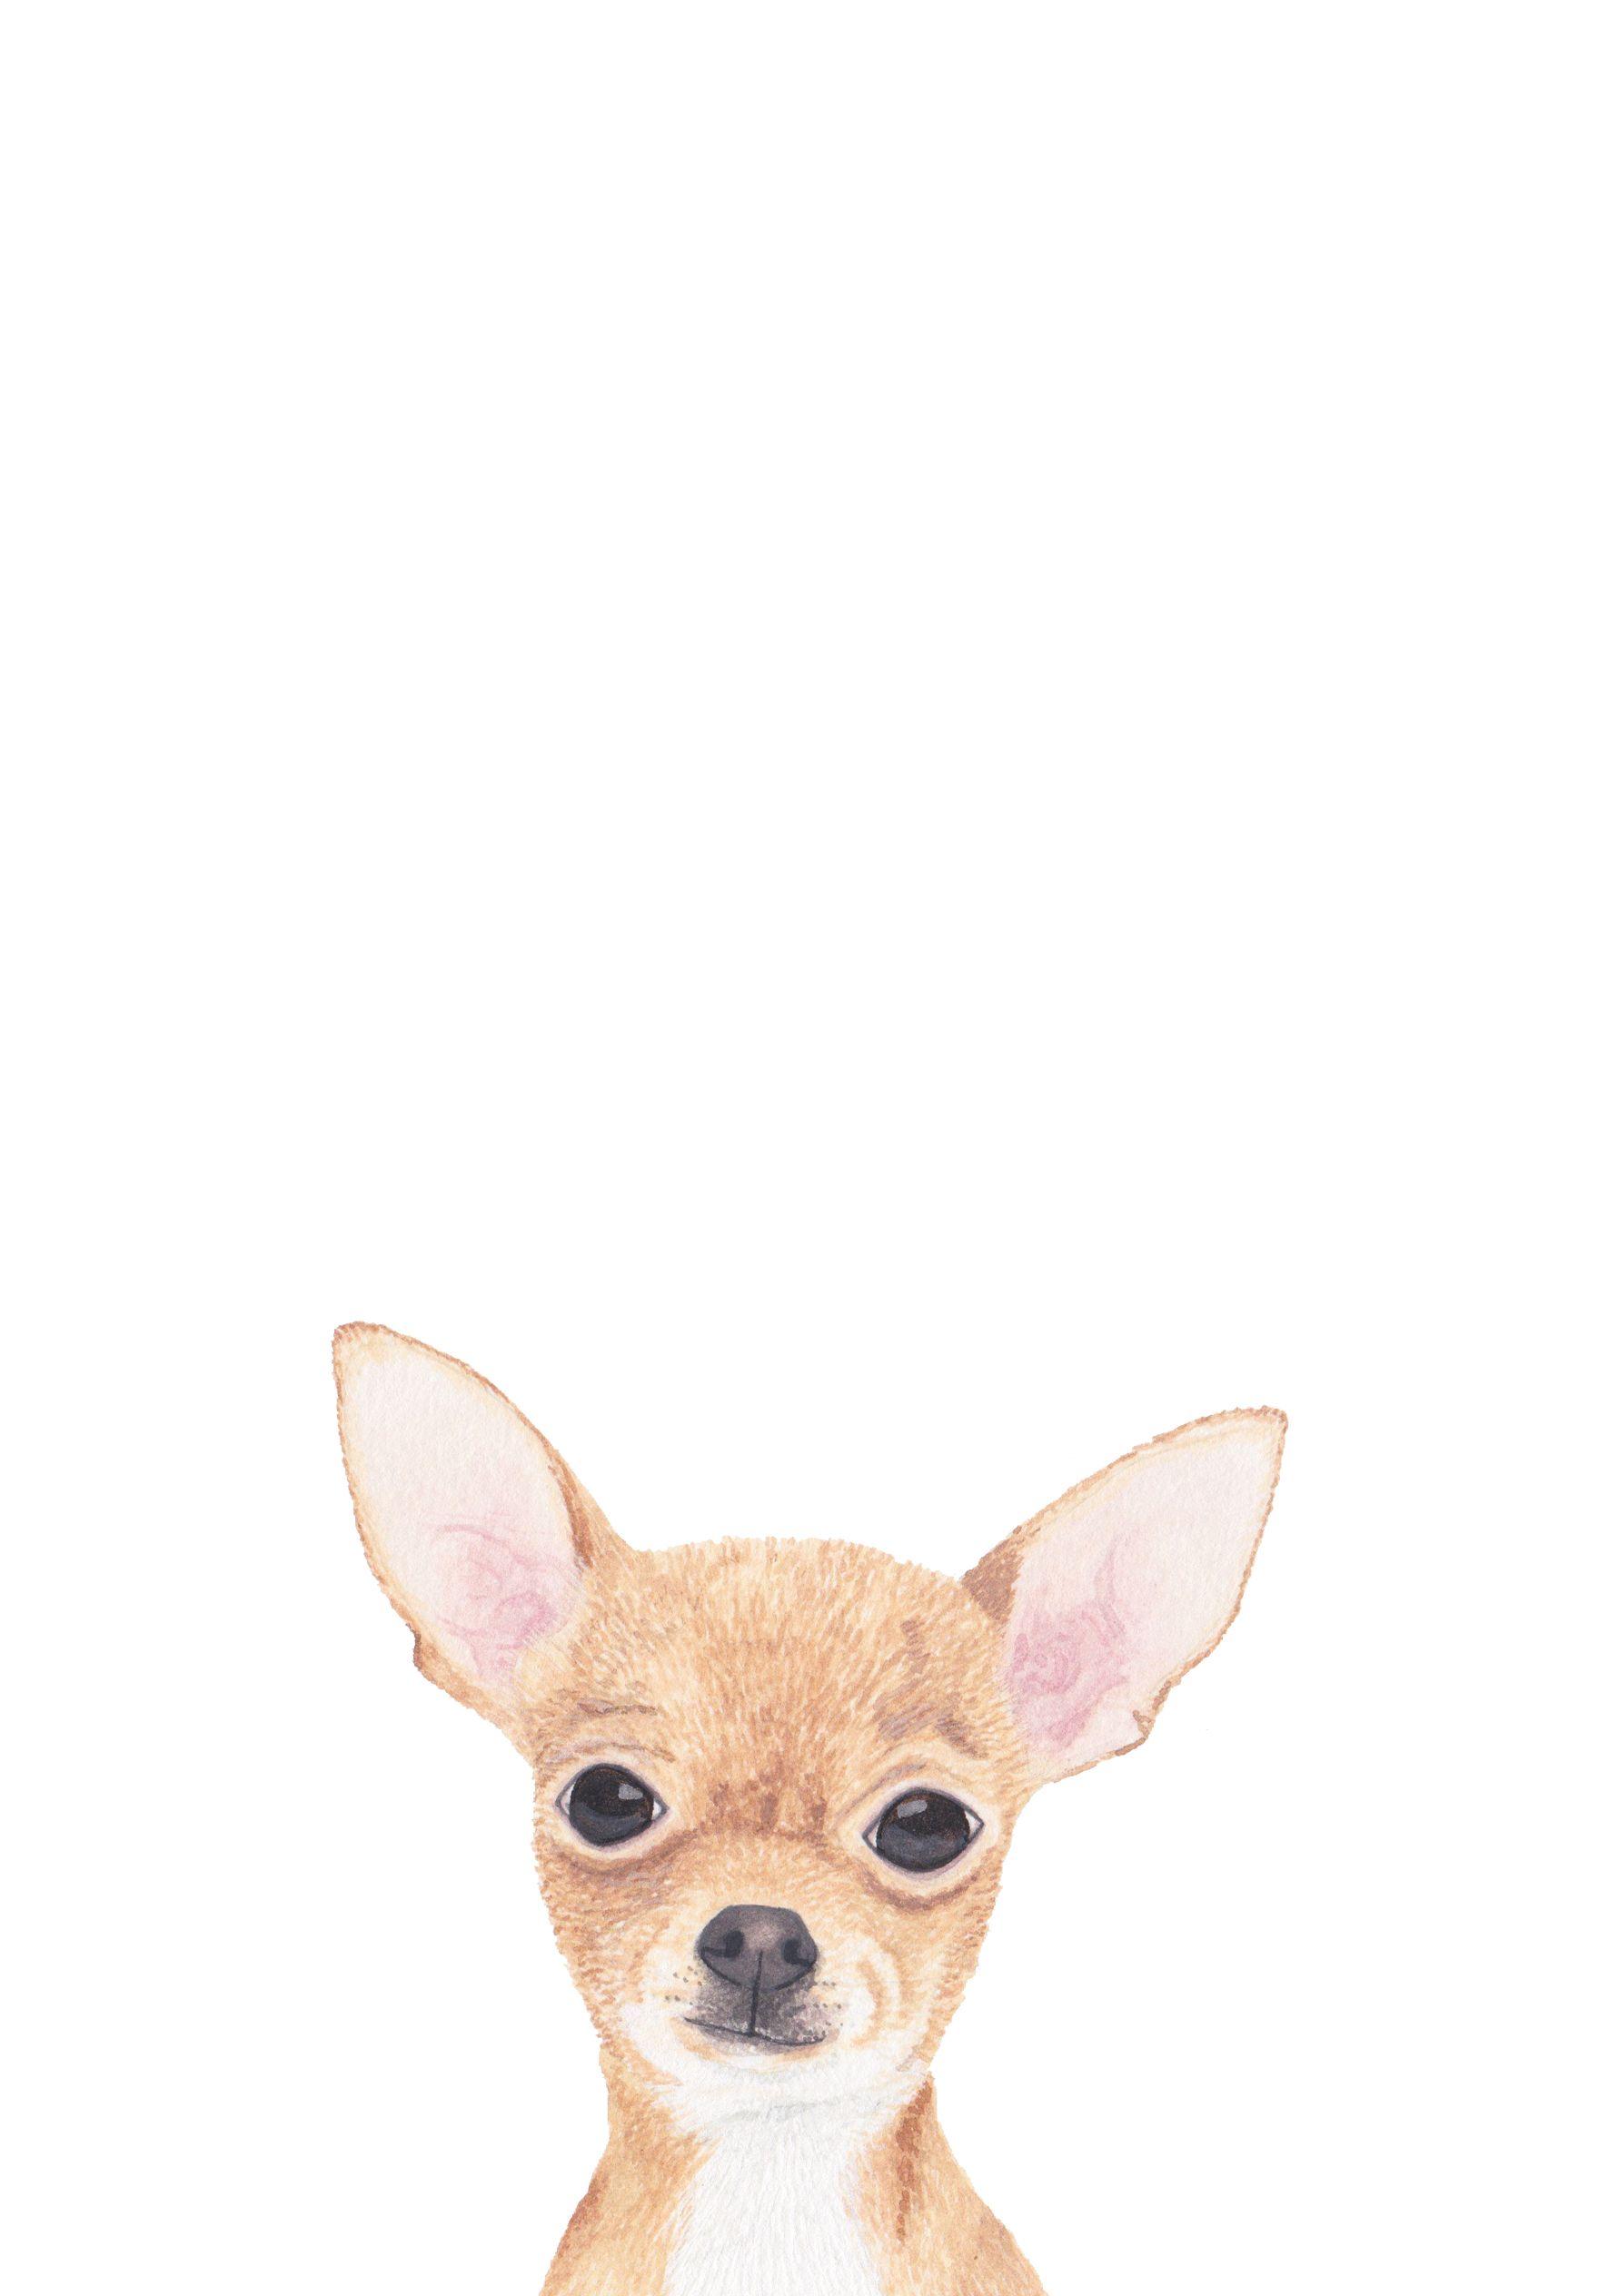 Chihuahua Illustration by Louise Jewell. CHIHUAHUA'S I LUV THEM